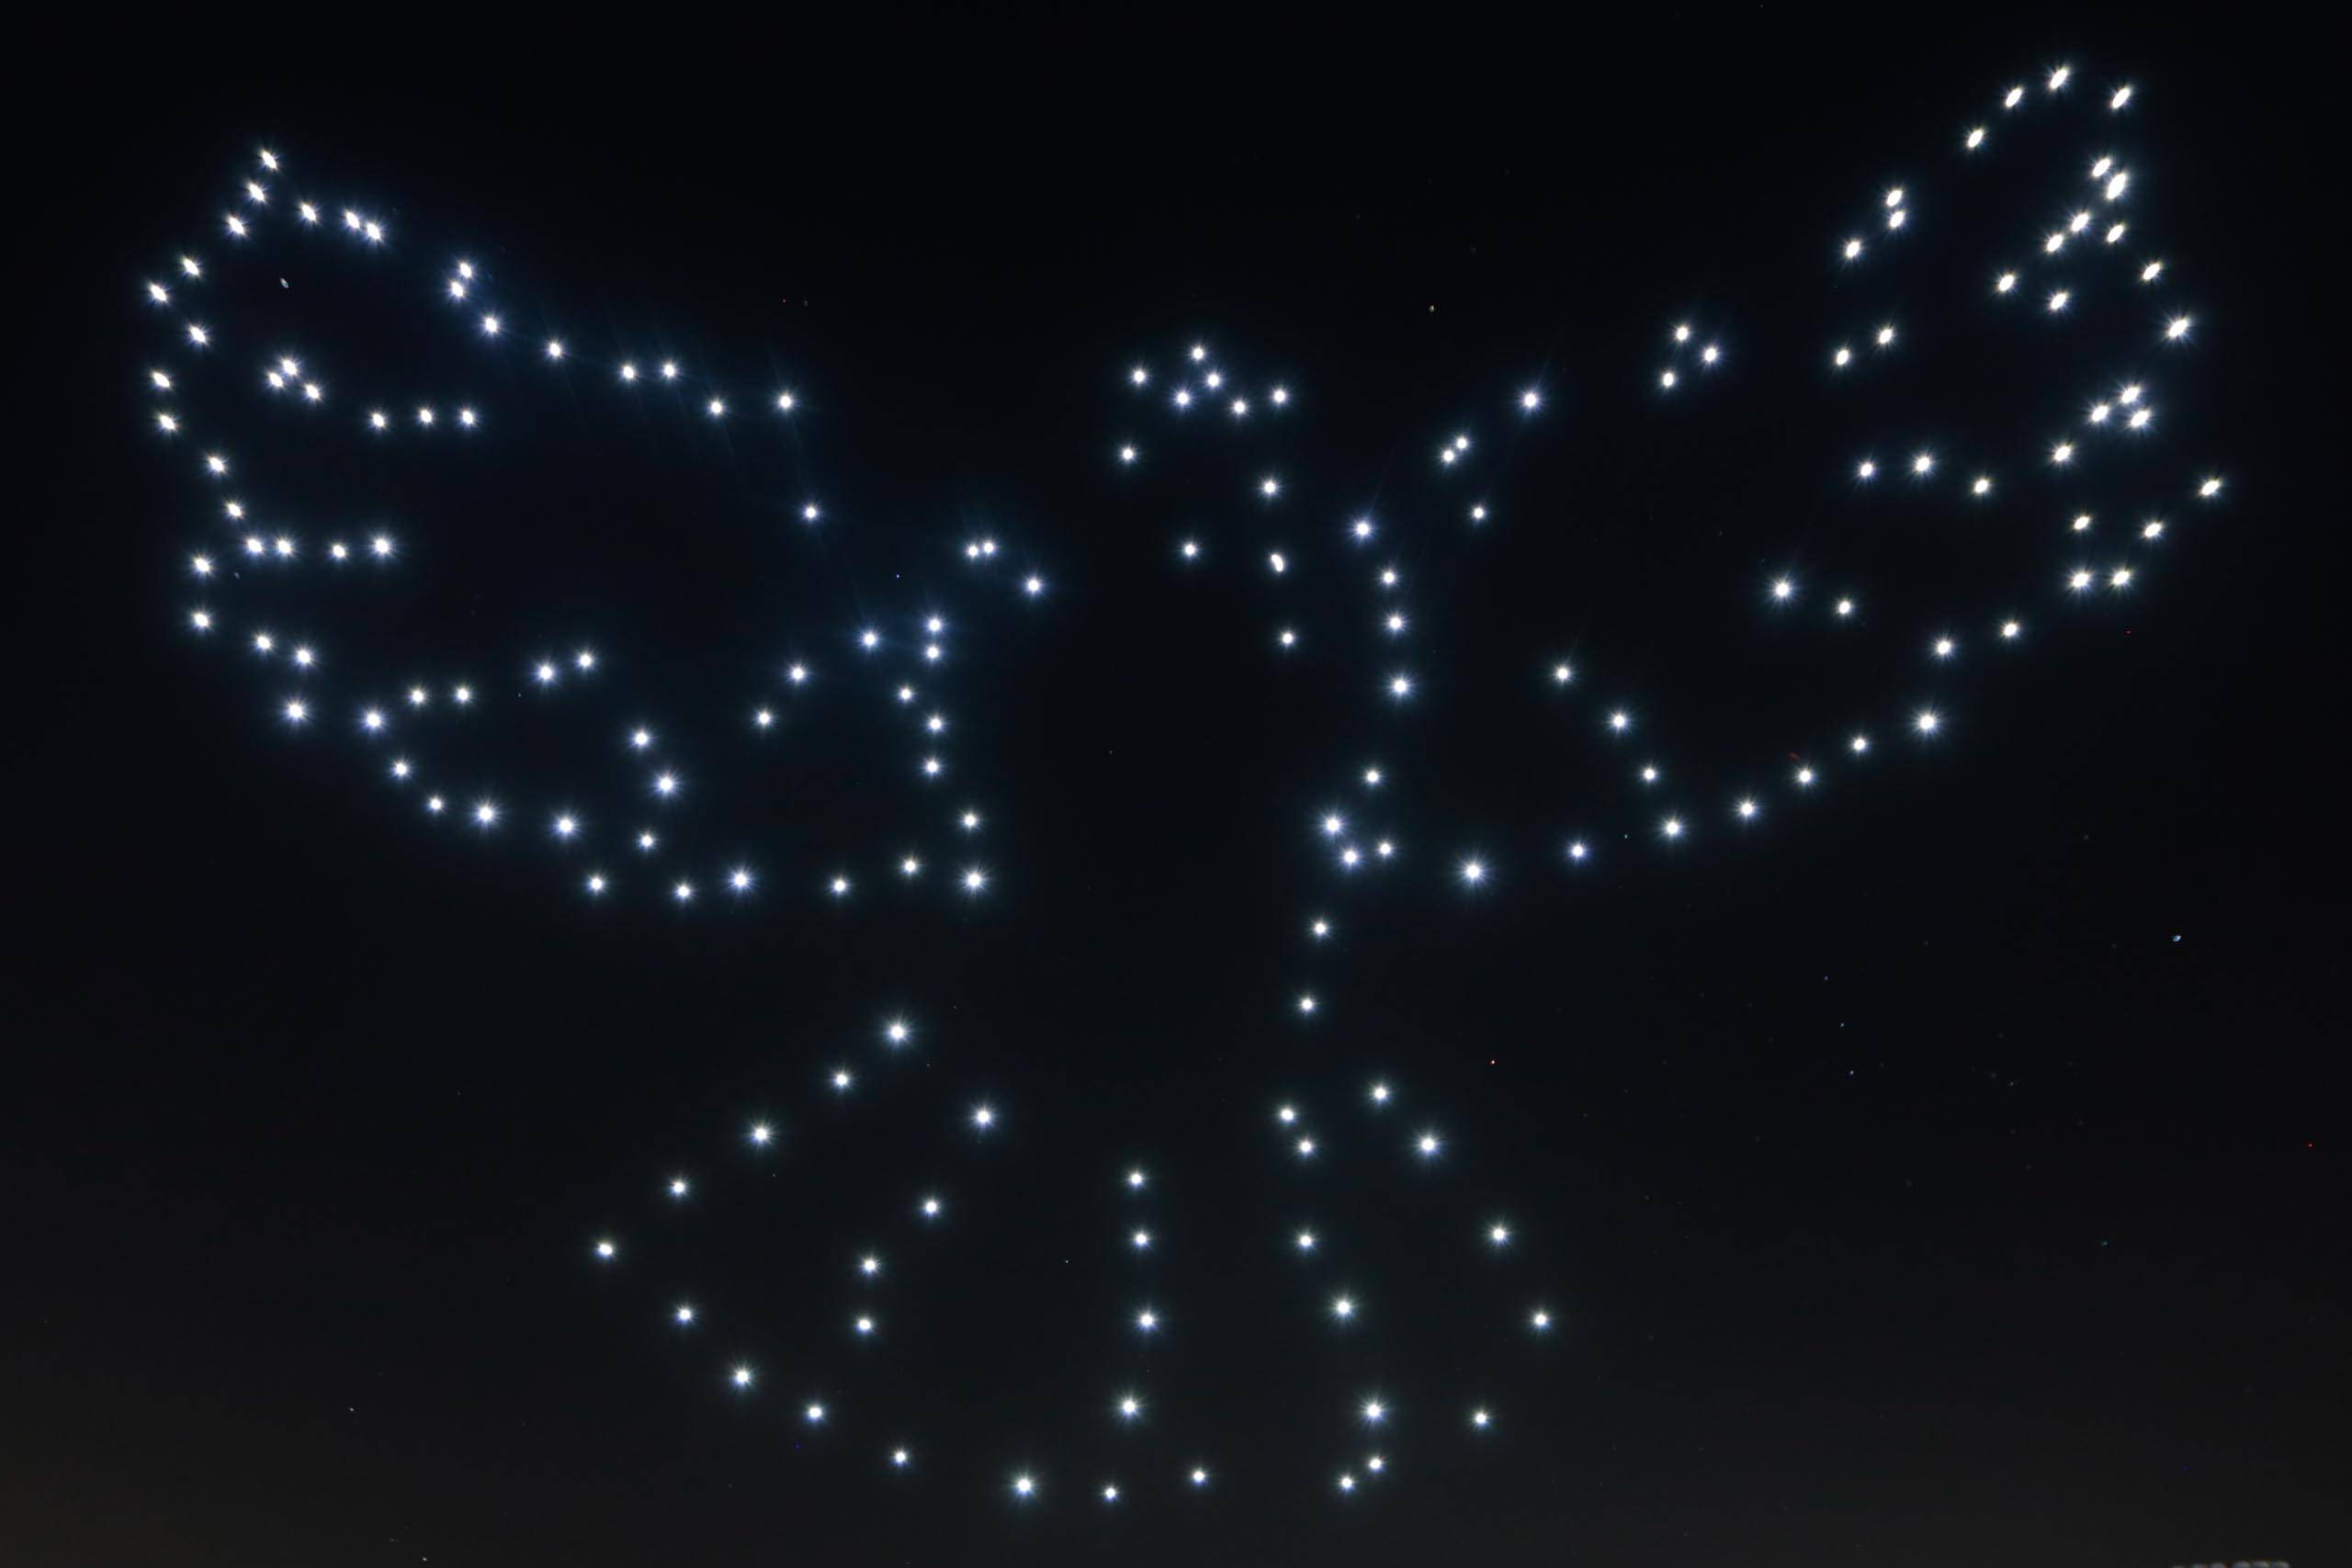 'Starbright Holidays' drone show gets official start date and performance times